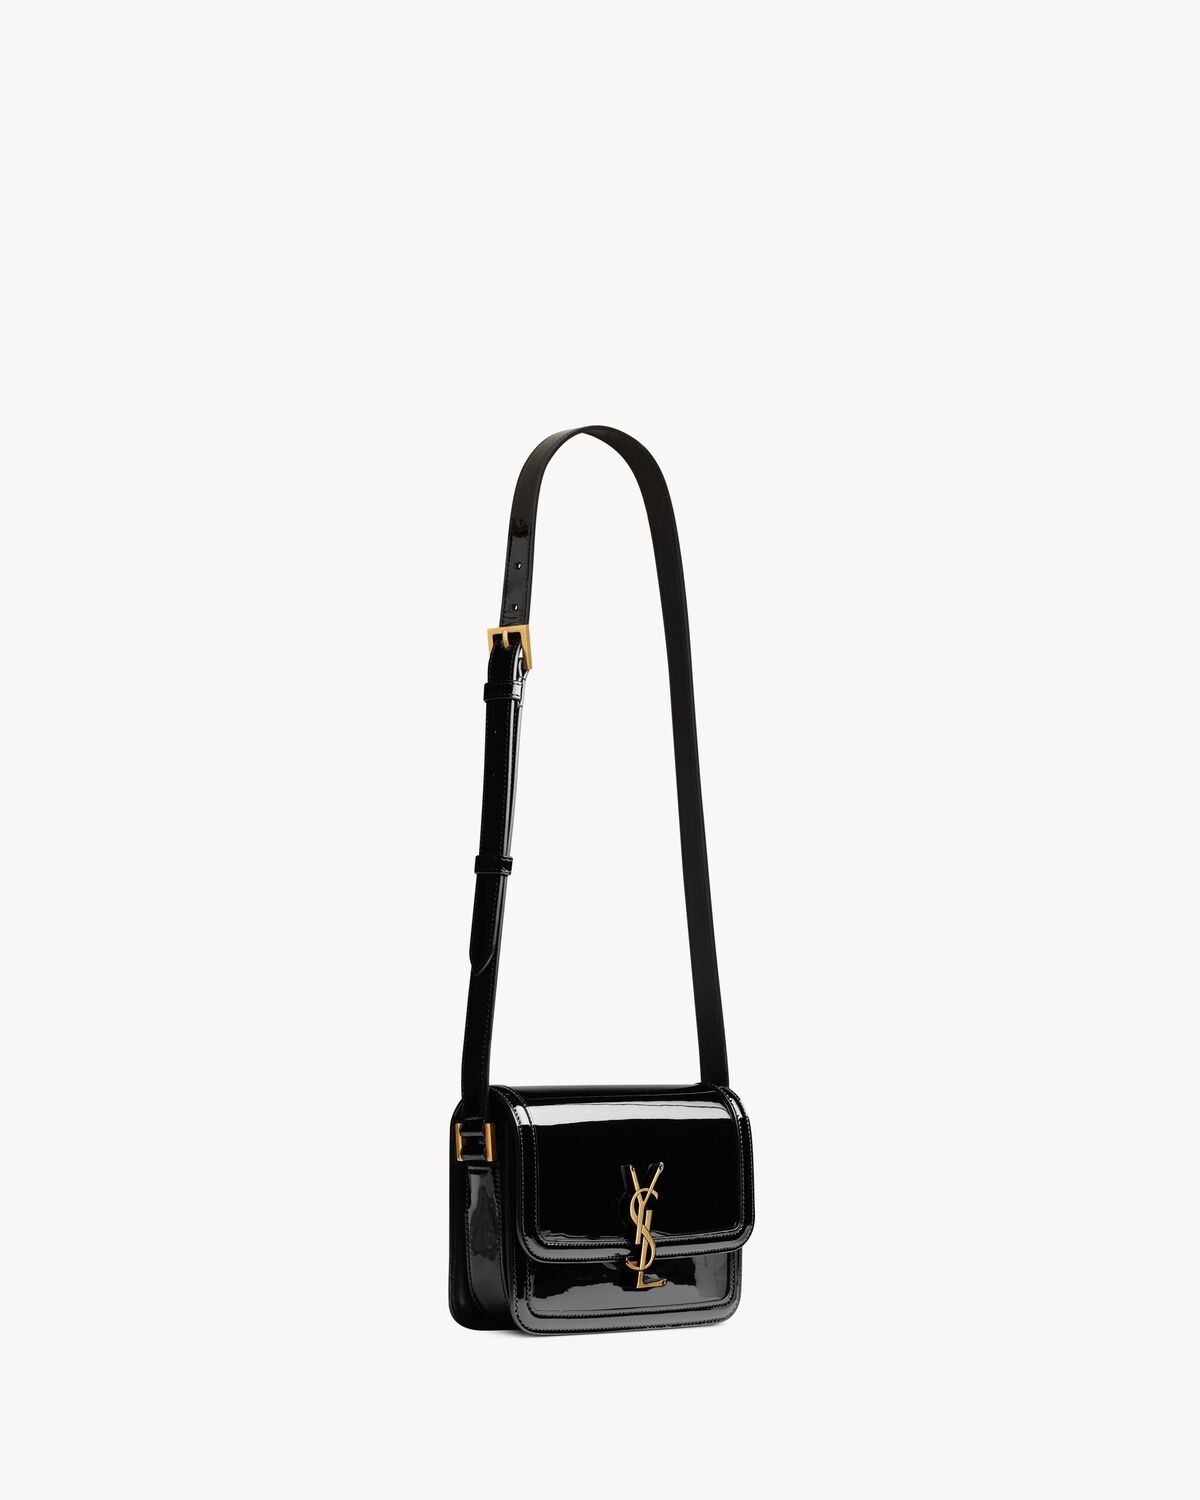 Solferino small satchel in lacquered patent leather